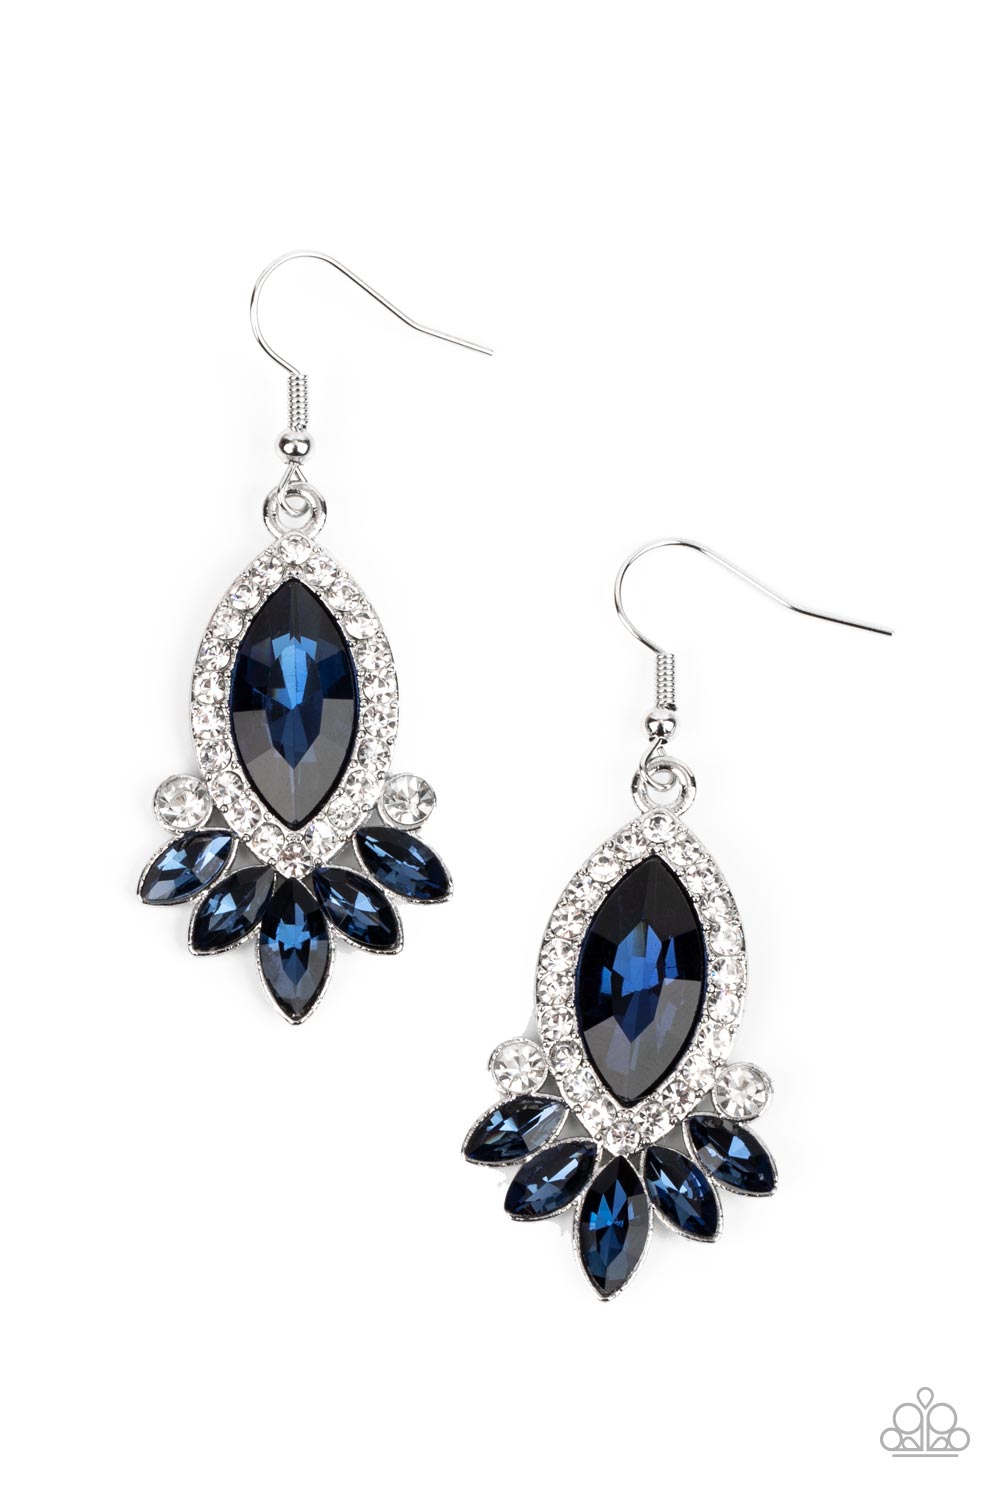 Prismatic Parade - Silver - Blue Gem Earrings - Paparazzi Accessories - Bordered in glassy white rhinestones, an oversized blue gem gives way to a dazzling blue fringe of marquise cut rhinestones for a fabulous finish. Earring attaches to a standard fishhook fitting.